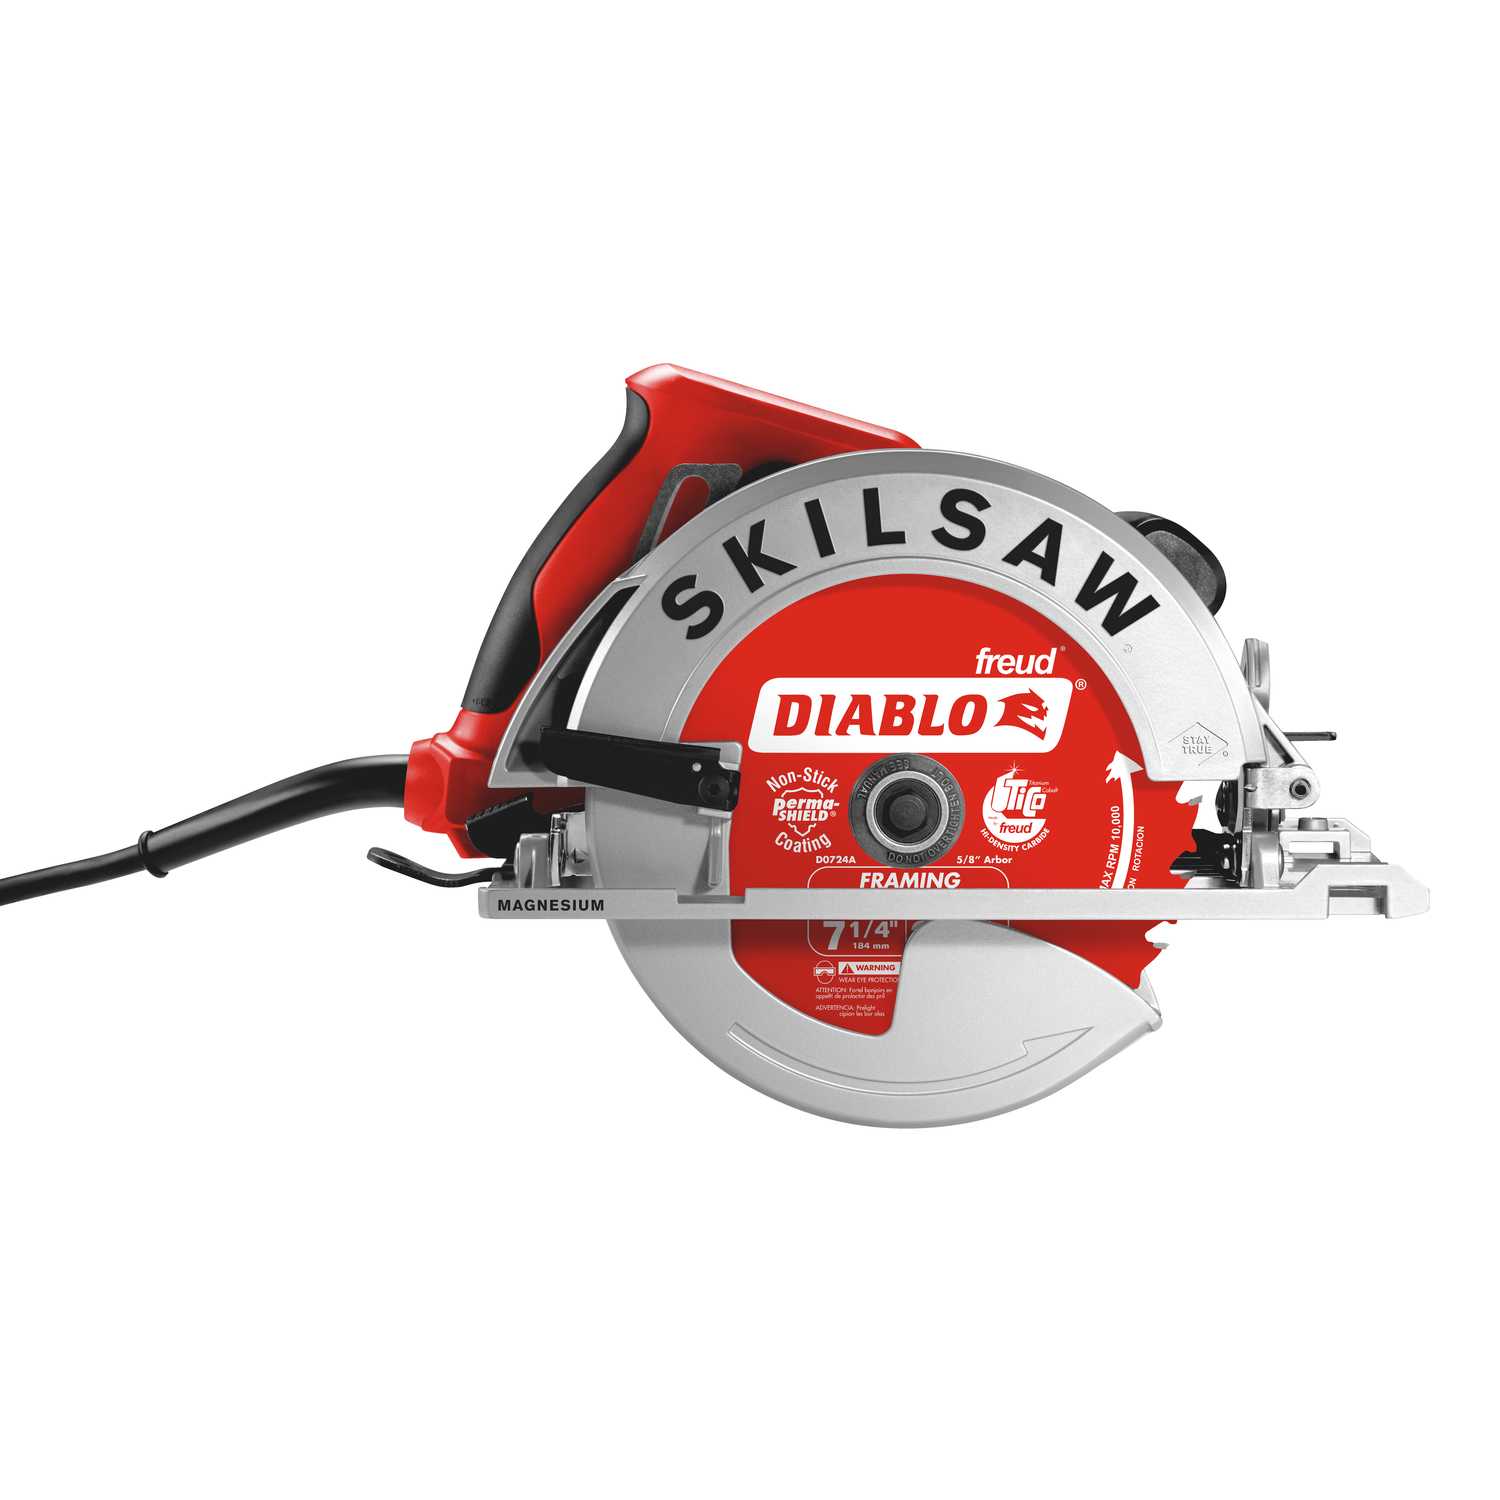 SKILSAW SIDEWINDER 7-1/4 in. Corded 15 amps Circular Saw Kit 5300 rpm